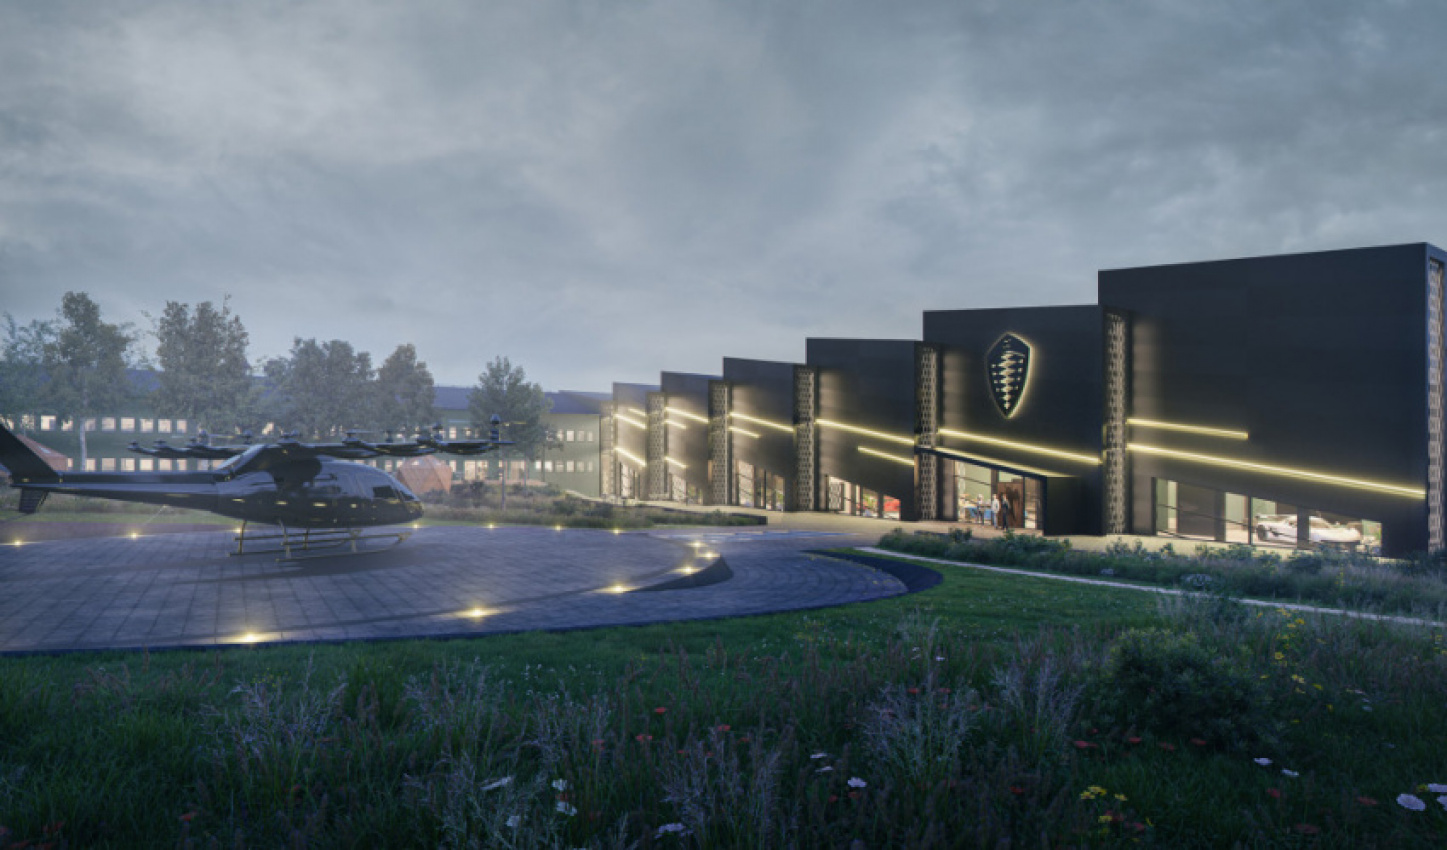 autos, cars, koenigsegg, industry, supercars, koenigsegg reveals plans for expansive new plant